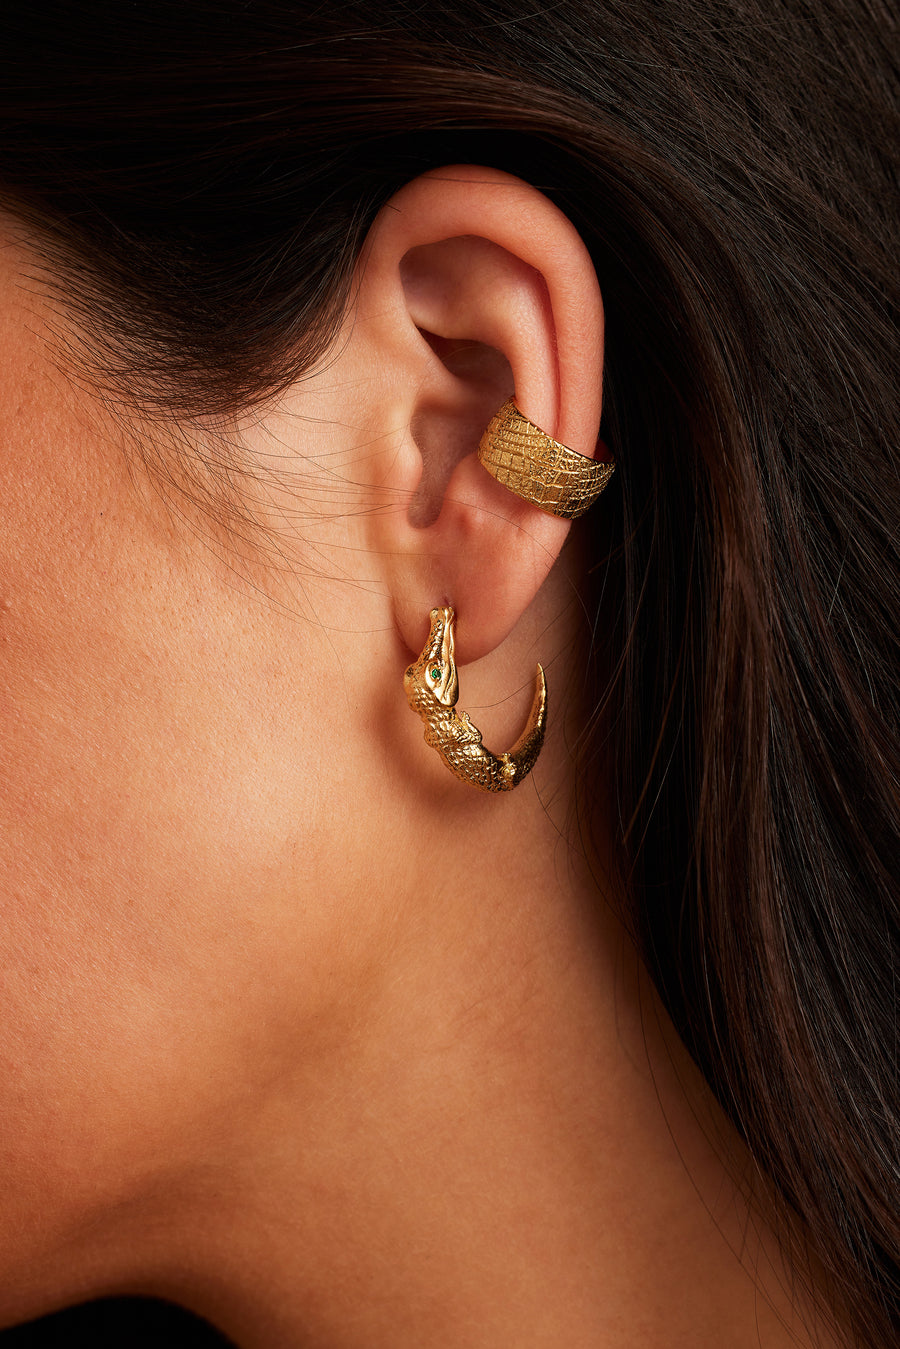 Woman wearing the Zapata Eye Croc Earrings in gold paired with the Desert Darling Ear Cuff